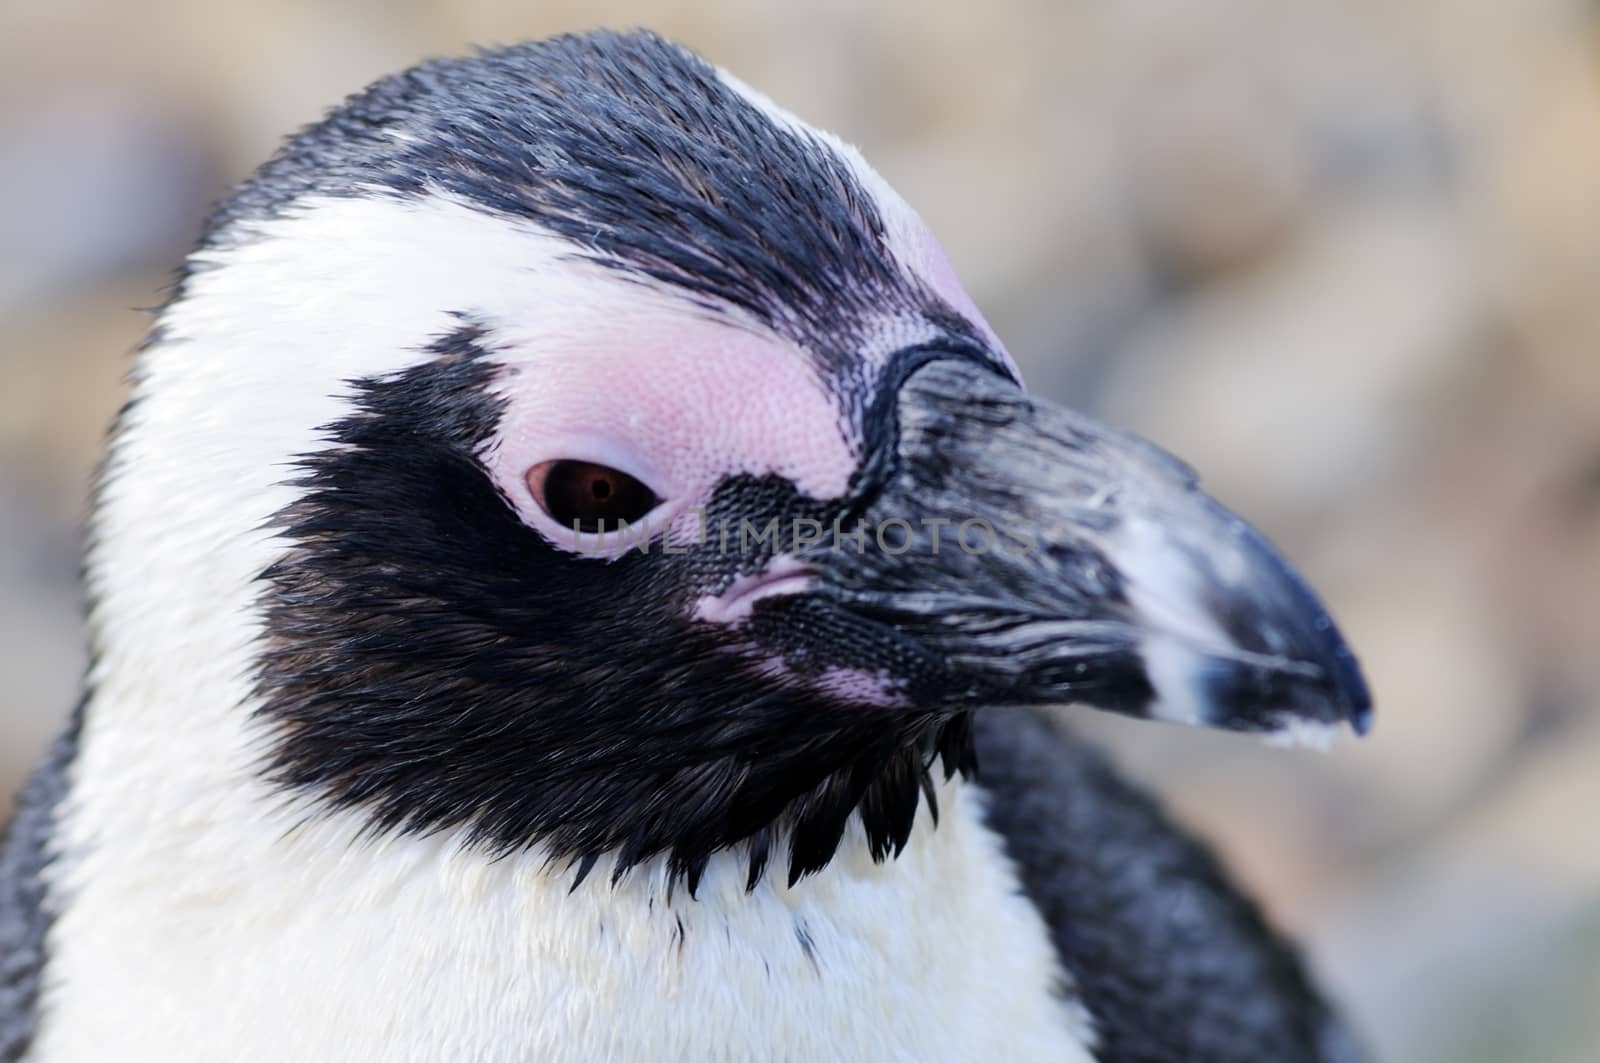 Penguin closeup by kmwphotography